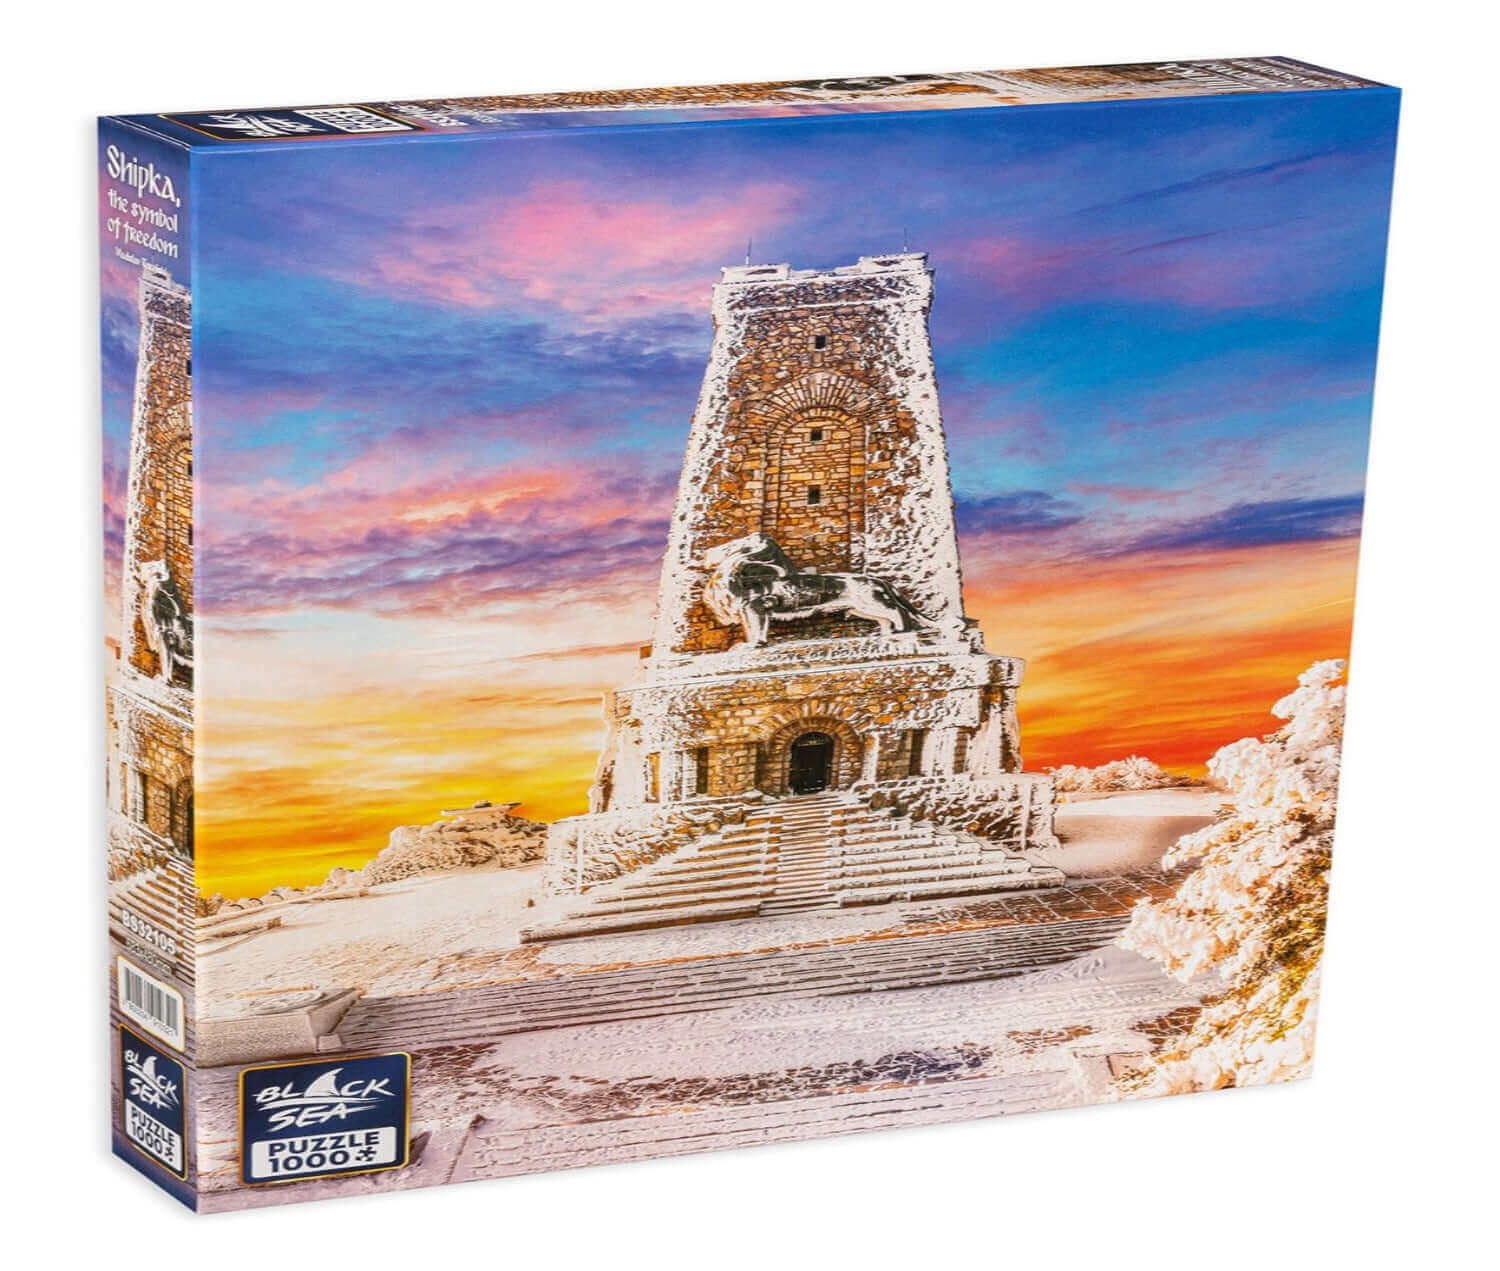 Puzzle Black Sea Premium 1000 pieces - Shipka, the Symbol of Freedom, For Bulgarians, Mount Shipka symbolizes the liberation of their country, the heroic deeds of their ancestors and their brave spirit. The monument of the liberation at the top of the mou